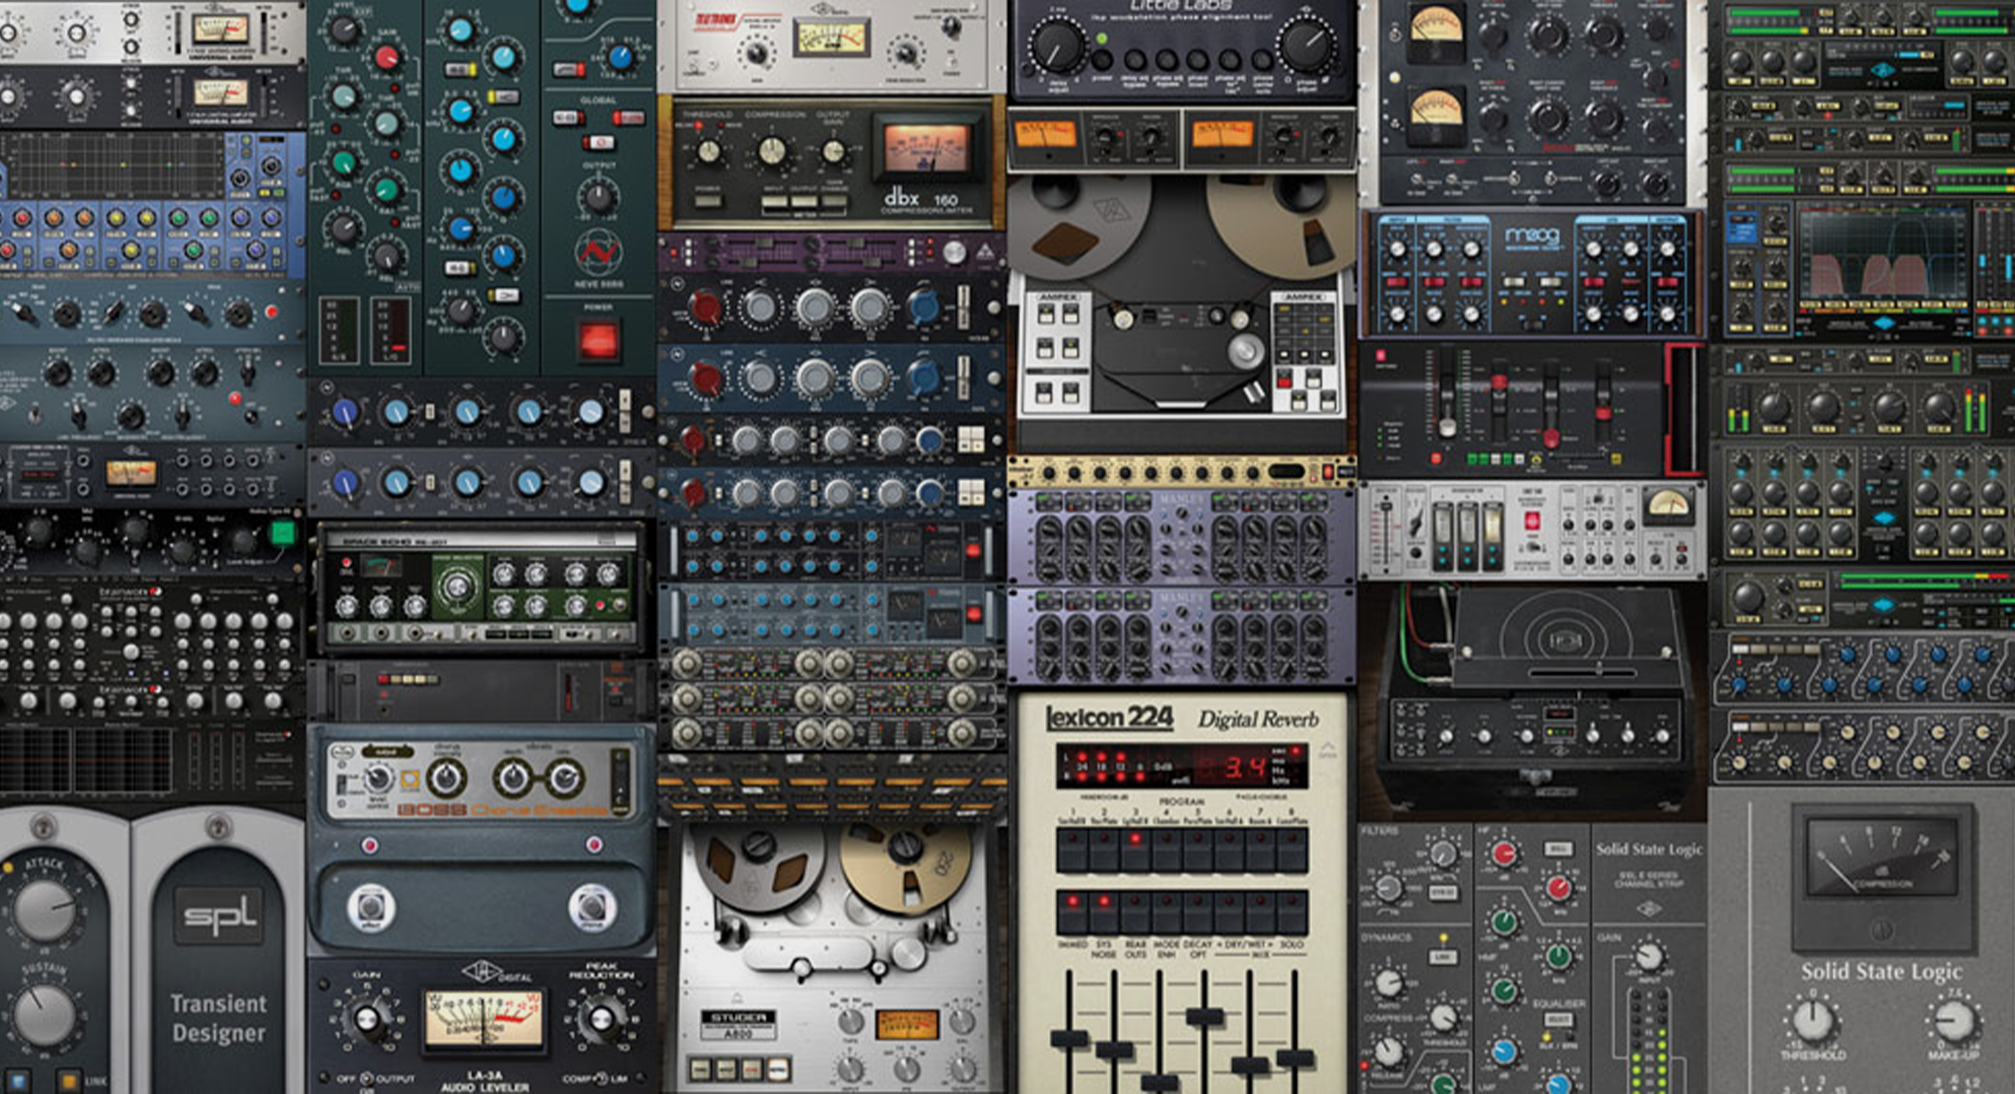 Top 5 Recommended UAD Plugins For A Beginner? - Audio Animals Ltd.